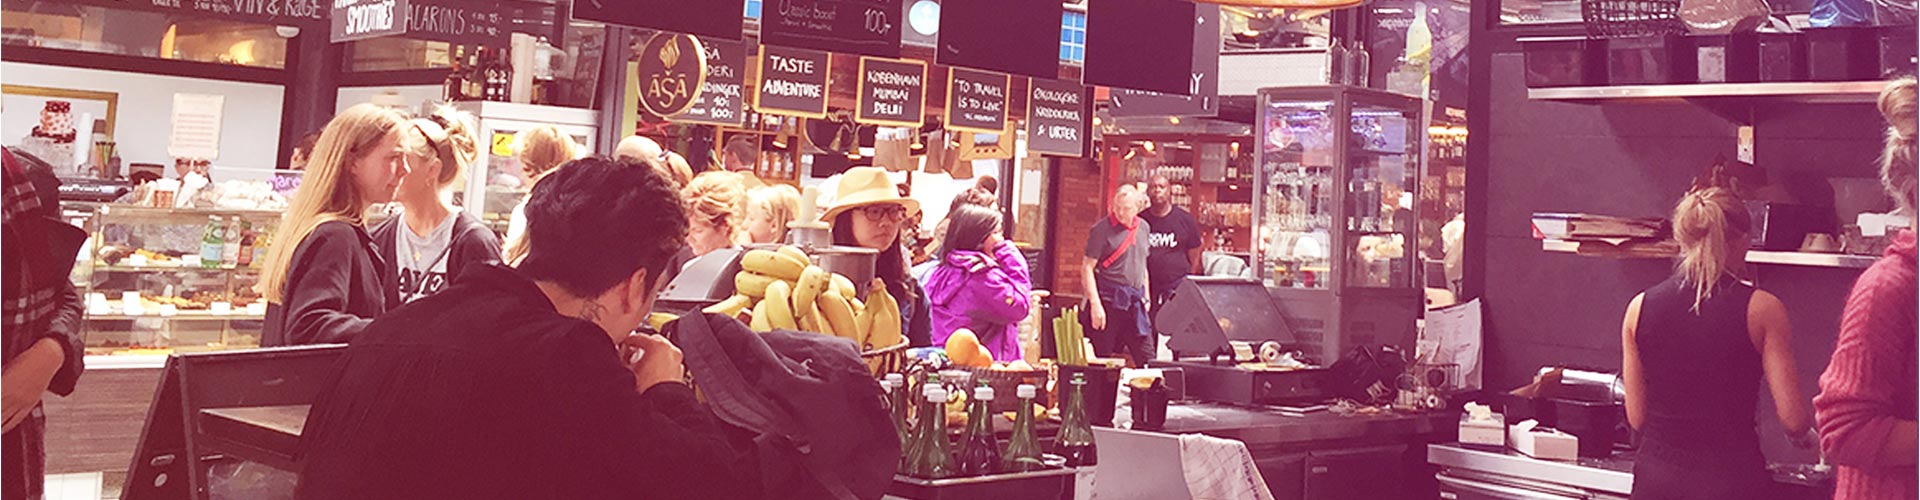 Blog banner featuring market cafe and shoppers busily moving around